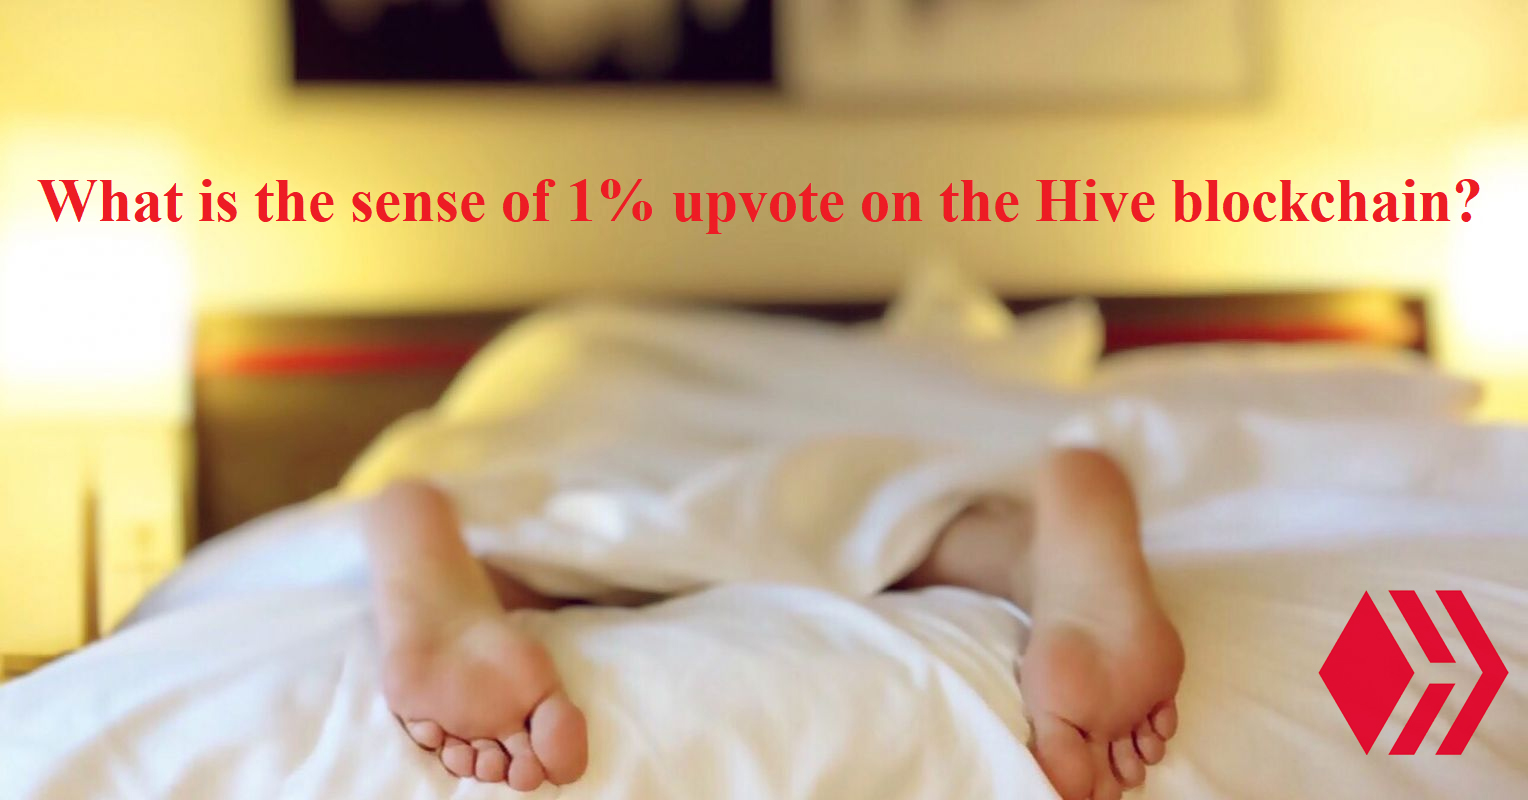 @behiver/what-is-the-sense-of-a-1-upvote-on-the-hive-blockchain